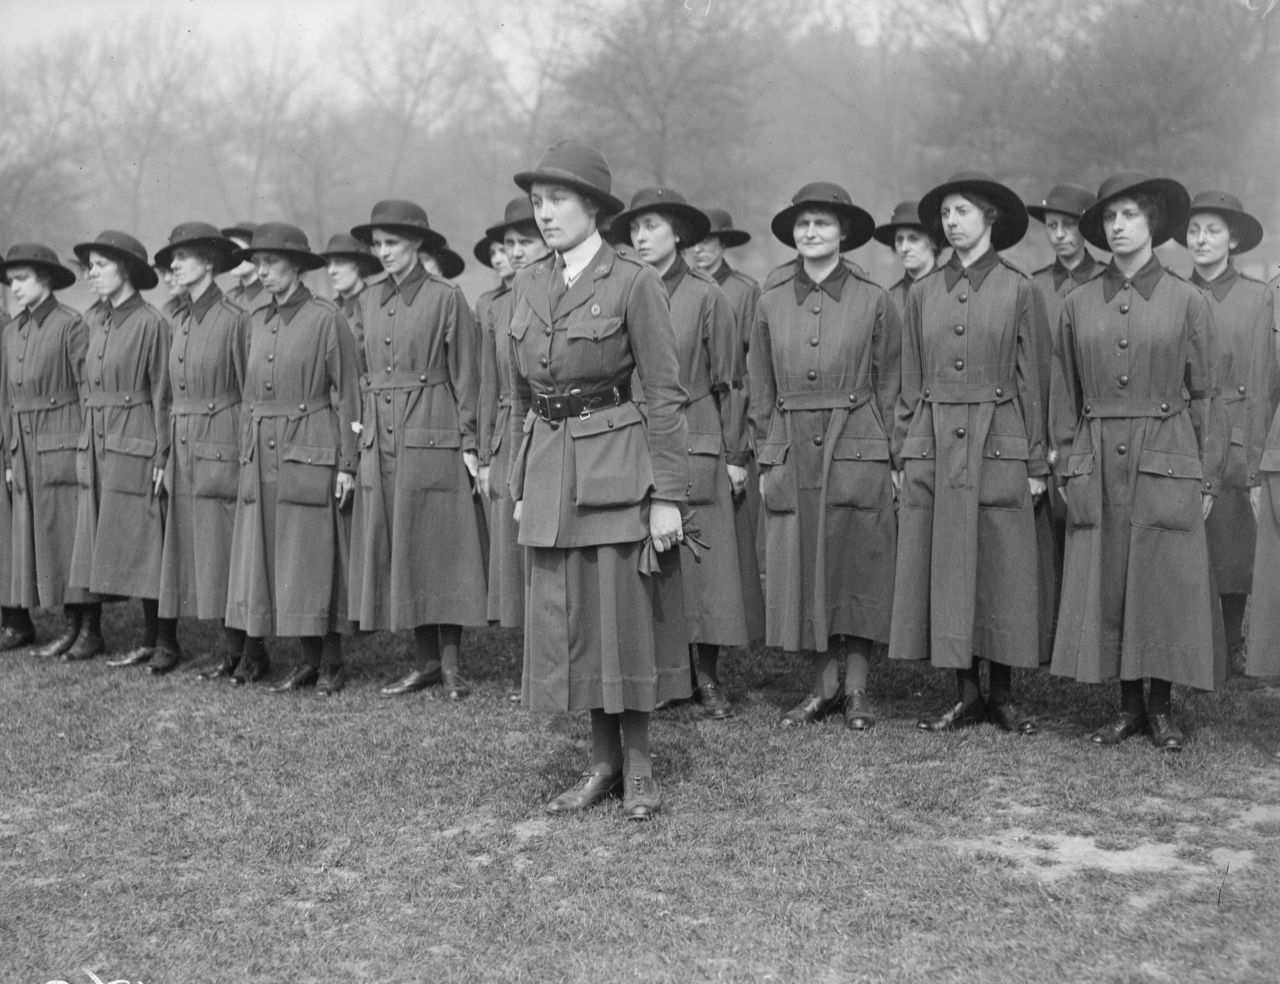 Female army recruits from the United Kingdom are seen during drills in May 1917. World War I broke down barriers between military and civilian life. With the men away in battle, women took on an extraordinary role in support of the war, whether it was on the front lines or at home in factories and farms.